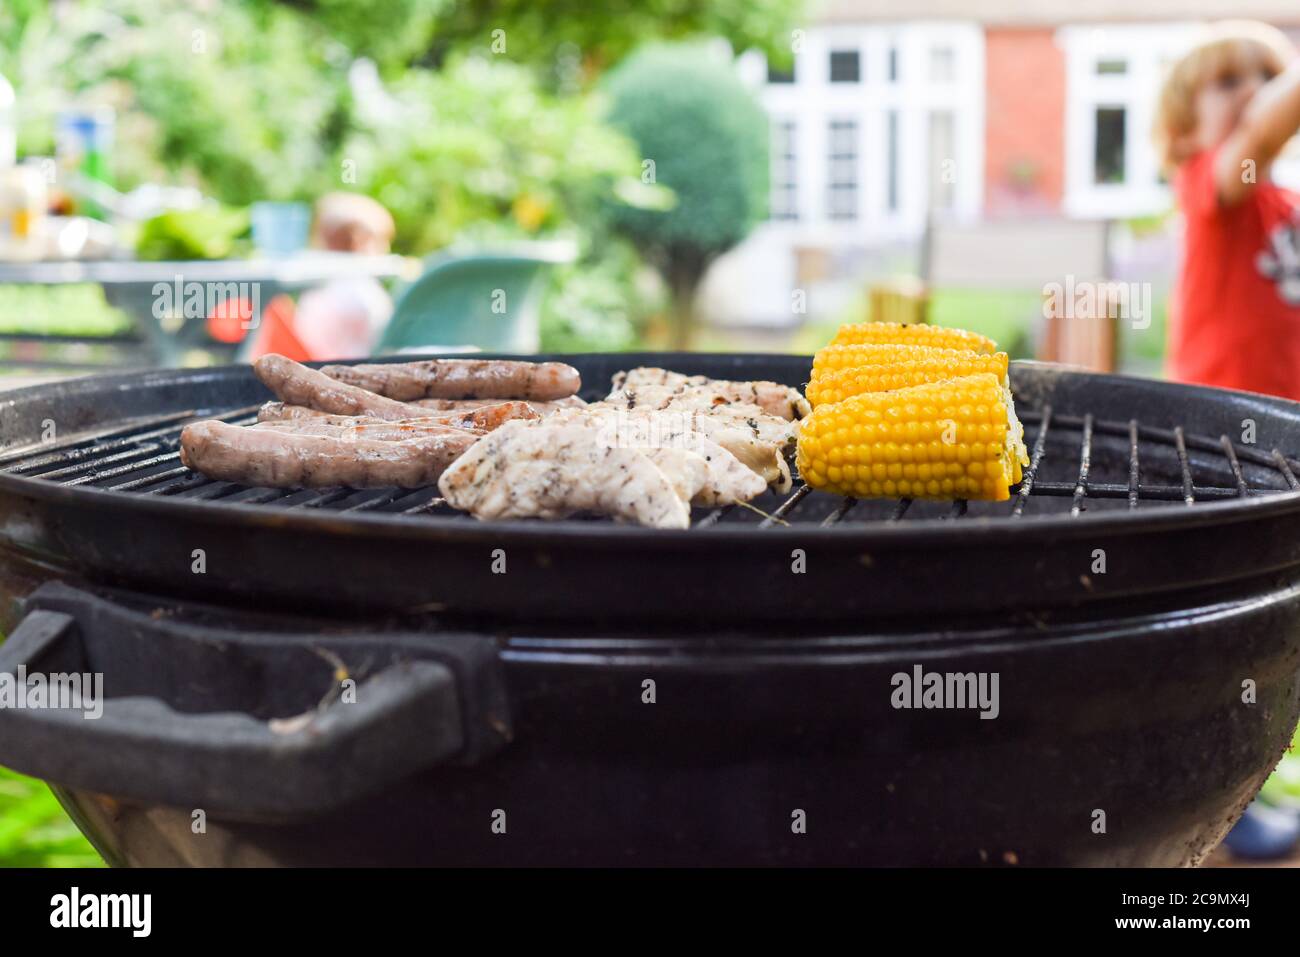 Family bbq outside in a garden with food on the barbecue grill cooking outdoors and people in the background Stock Photo